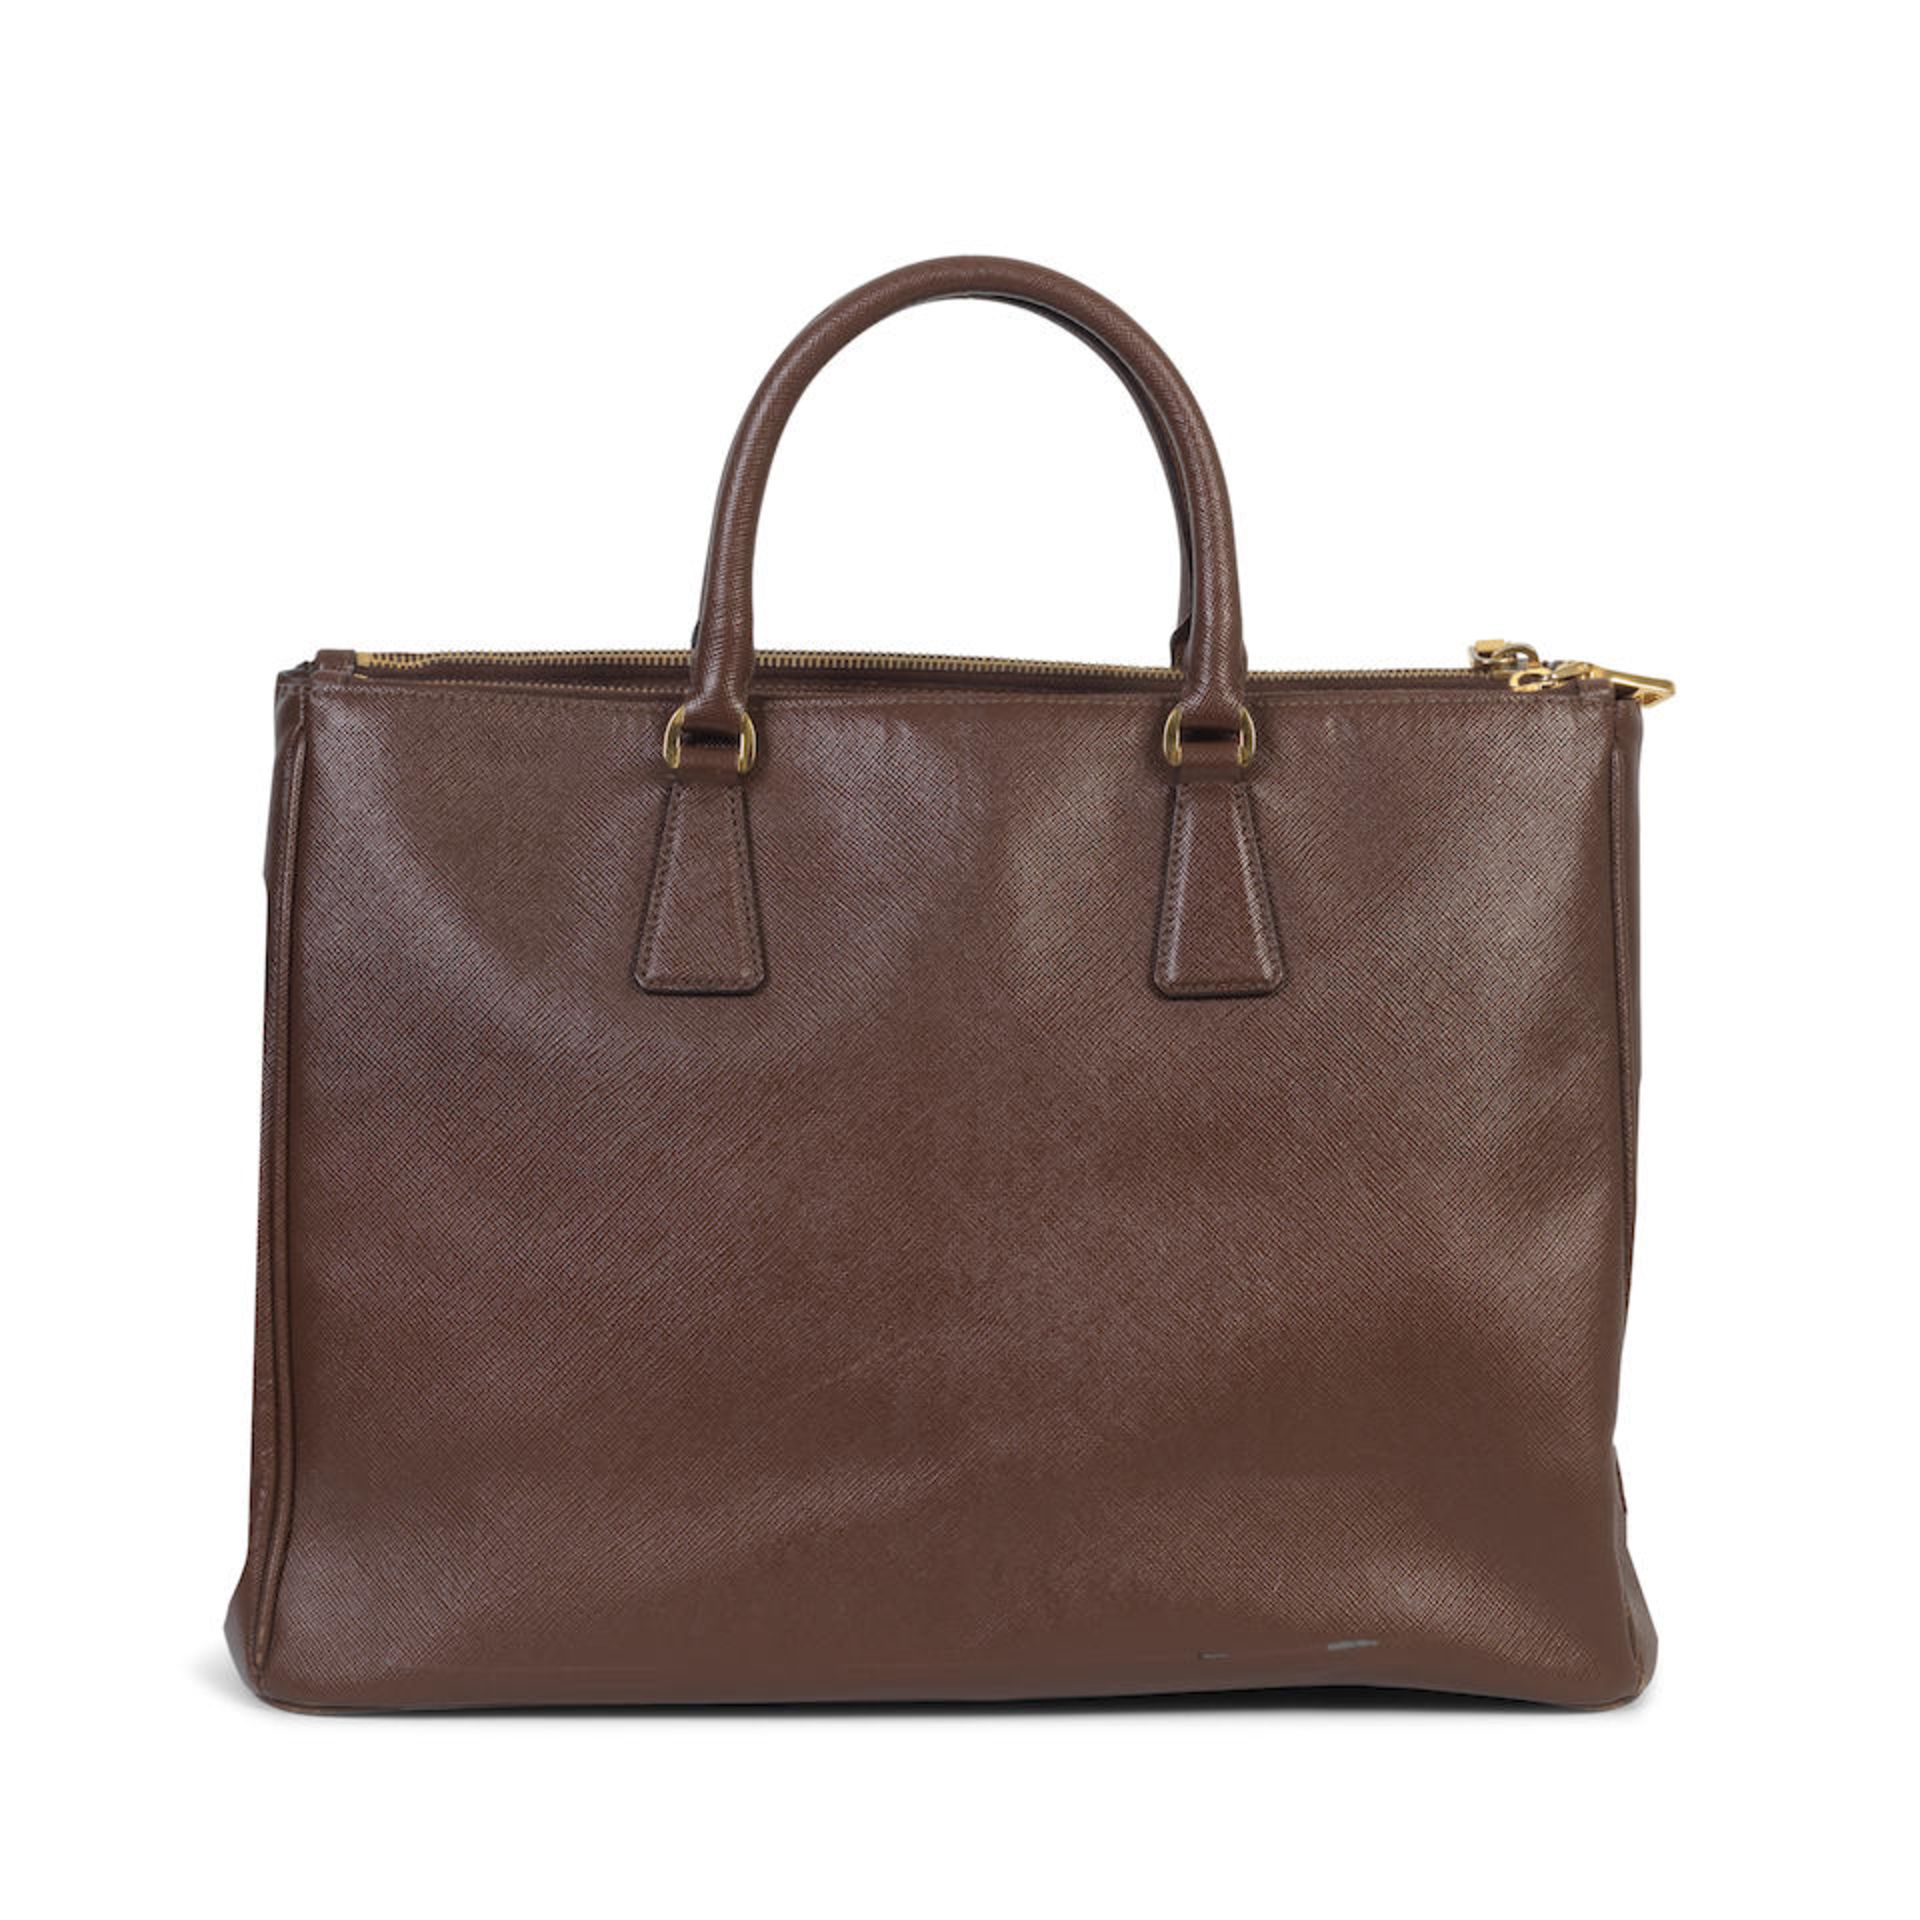 Prada: a Brown Saffiano Leather Large Galleria Tote - Image 2 of 2